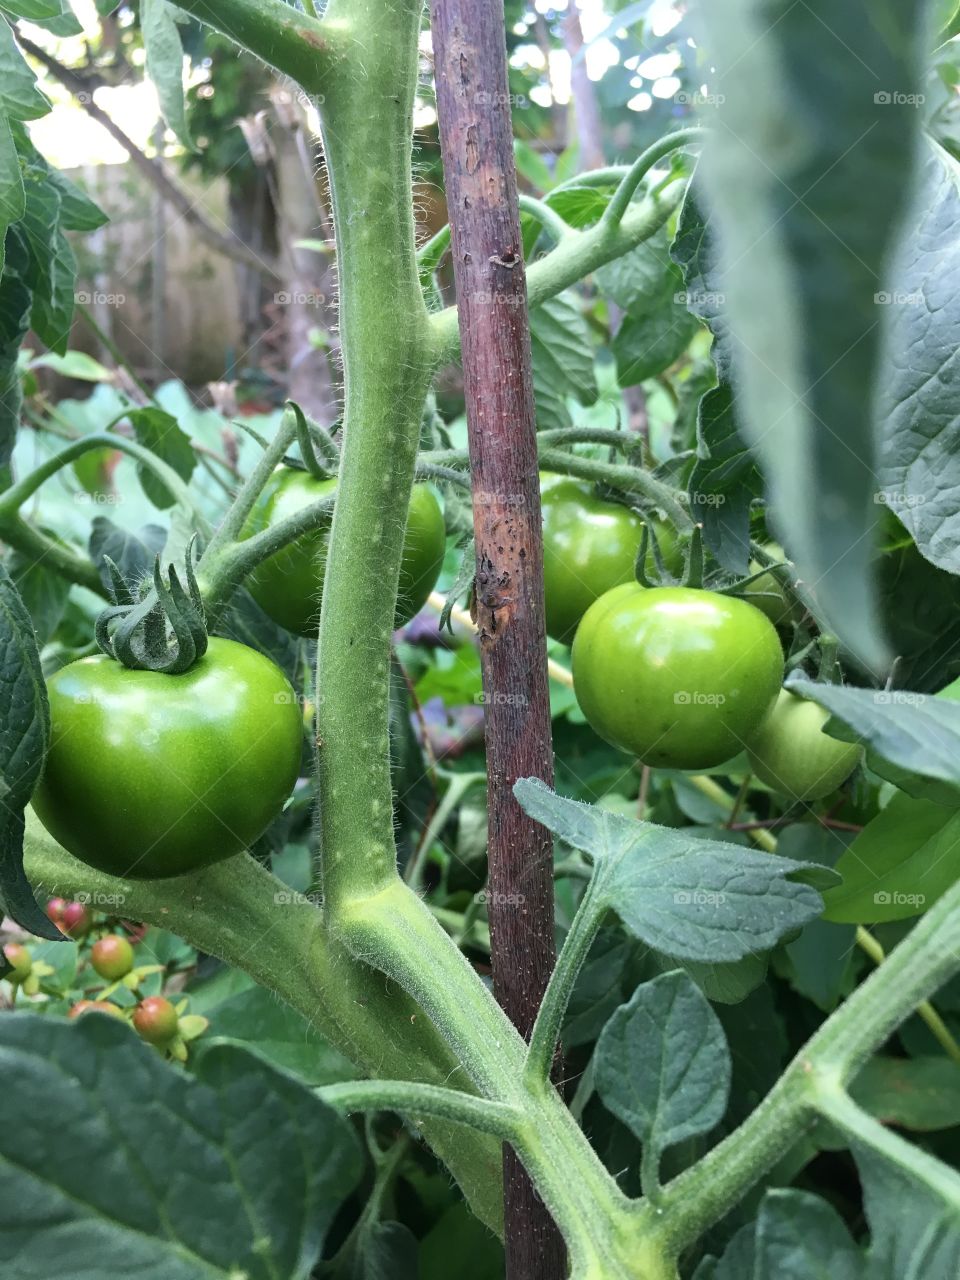 Unripe Green Tomatoes Growing In A Greenhouse On The Vine